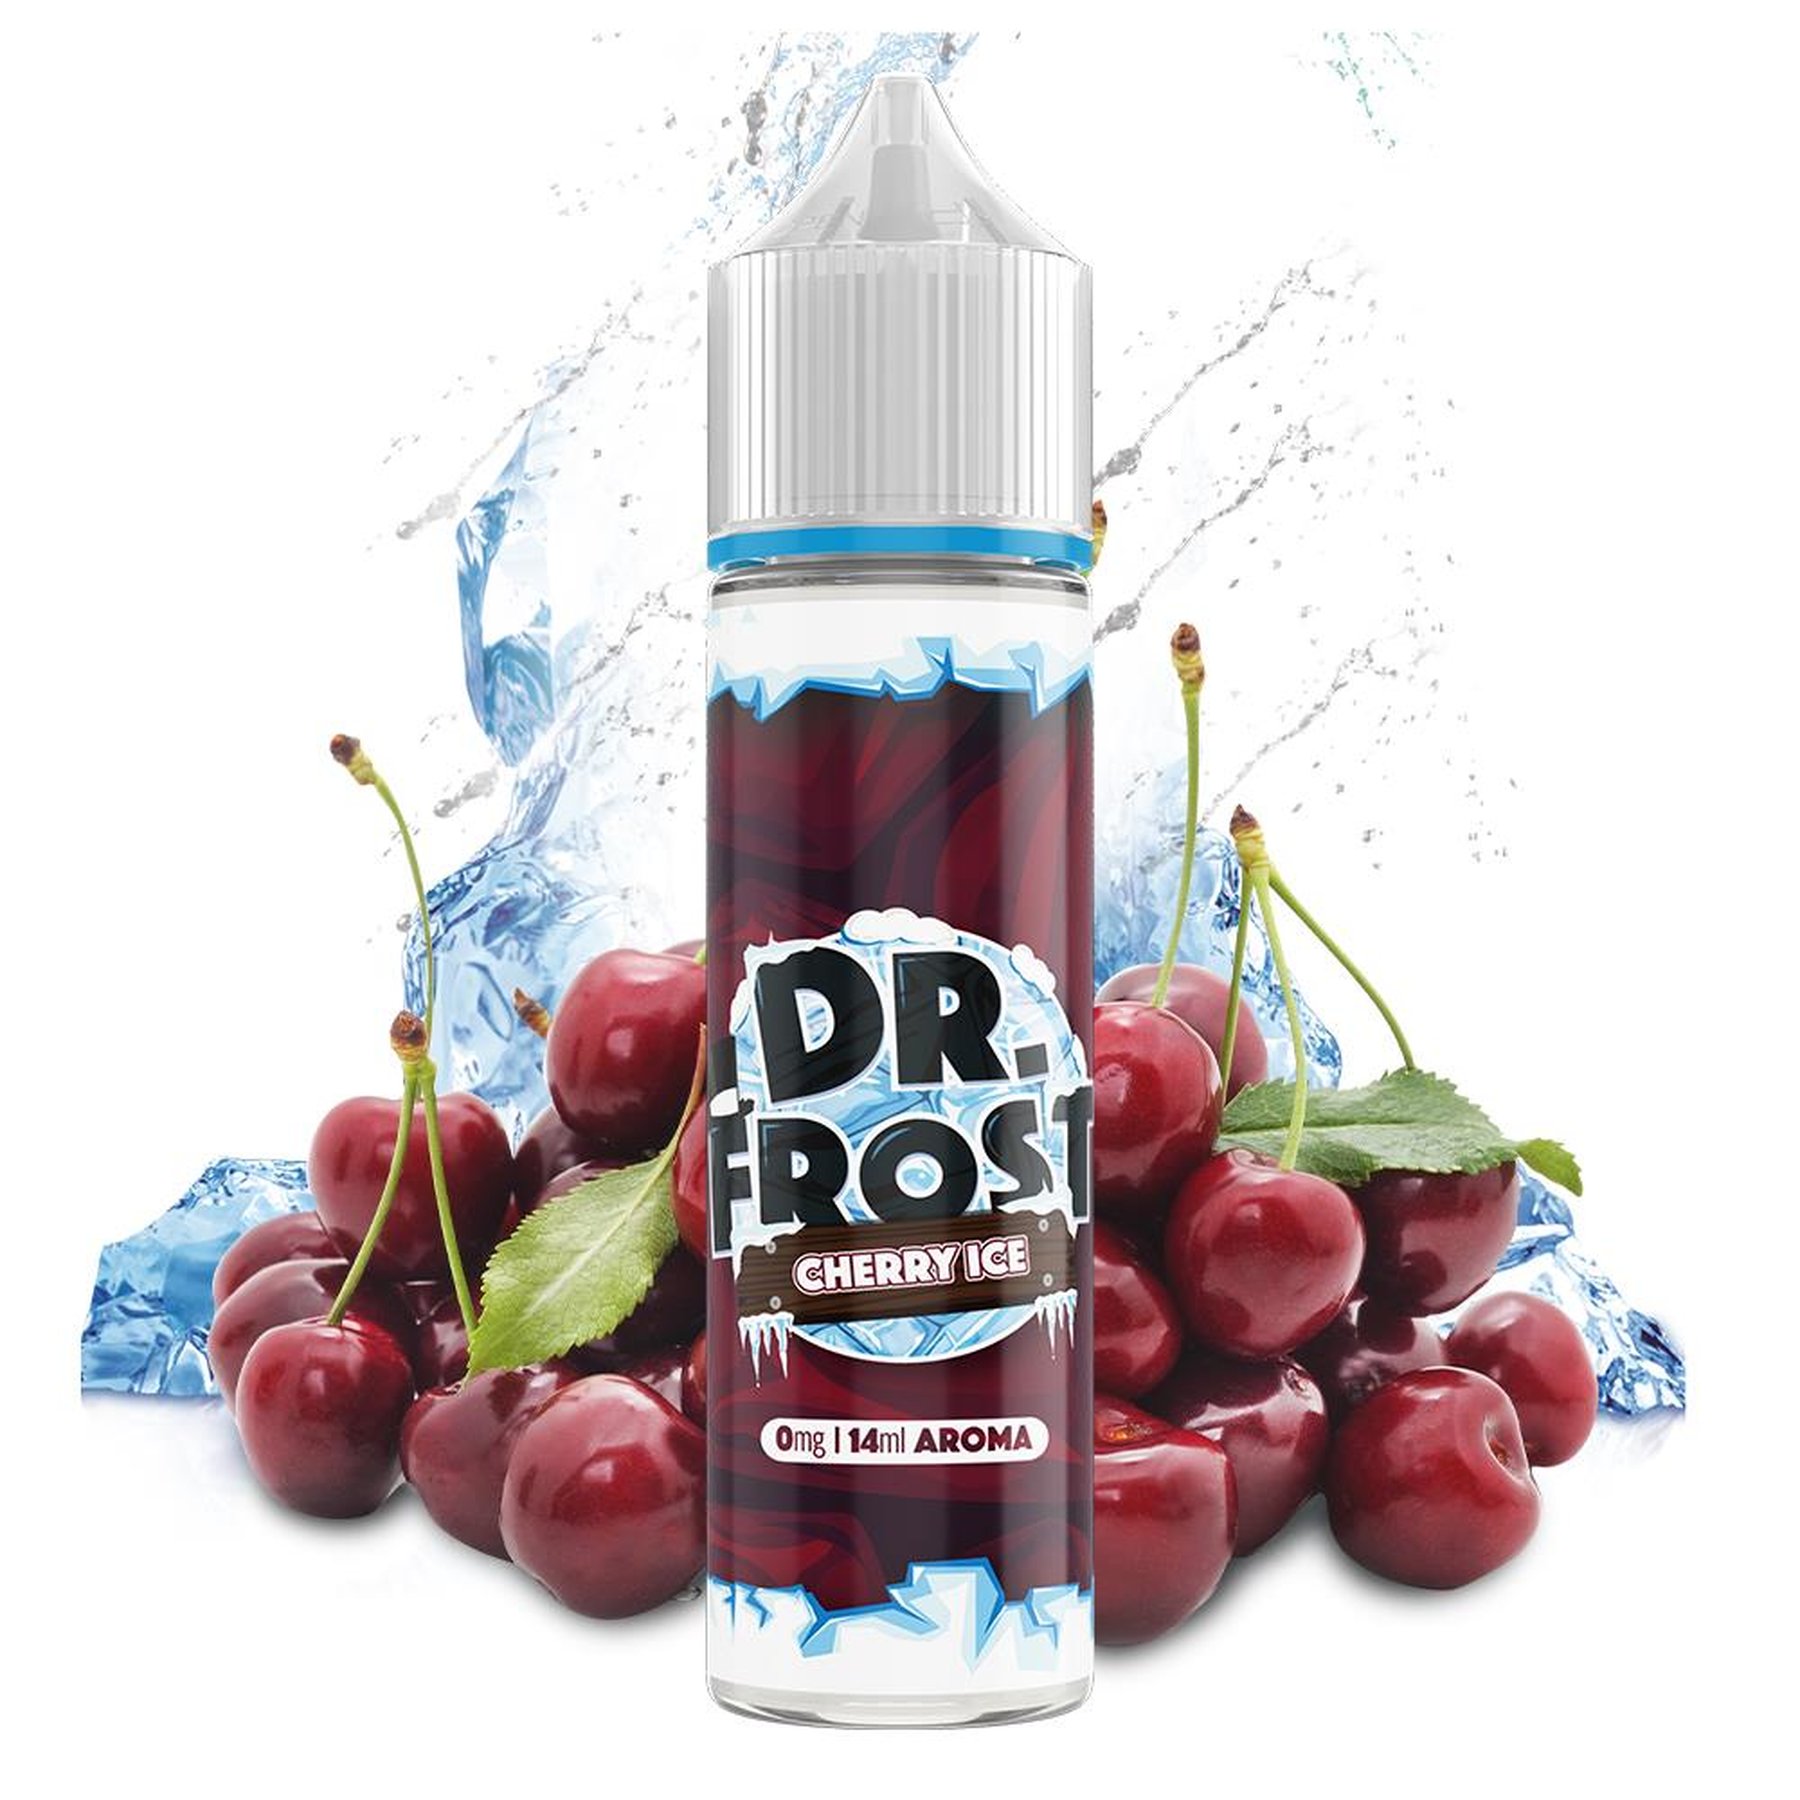 Dr. Frost Cherry Ice Longfill 14ml